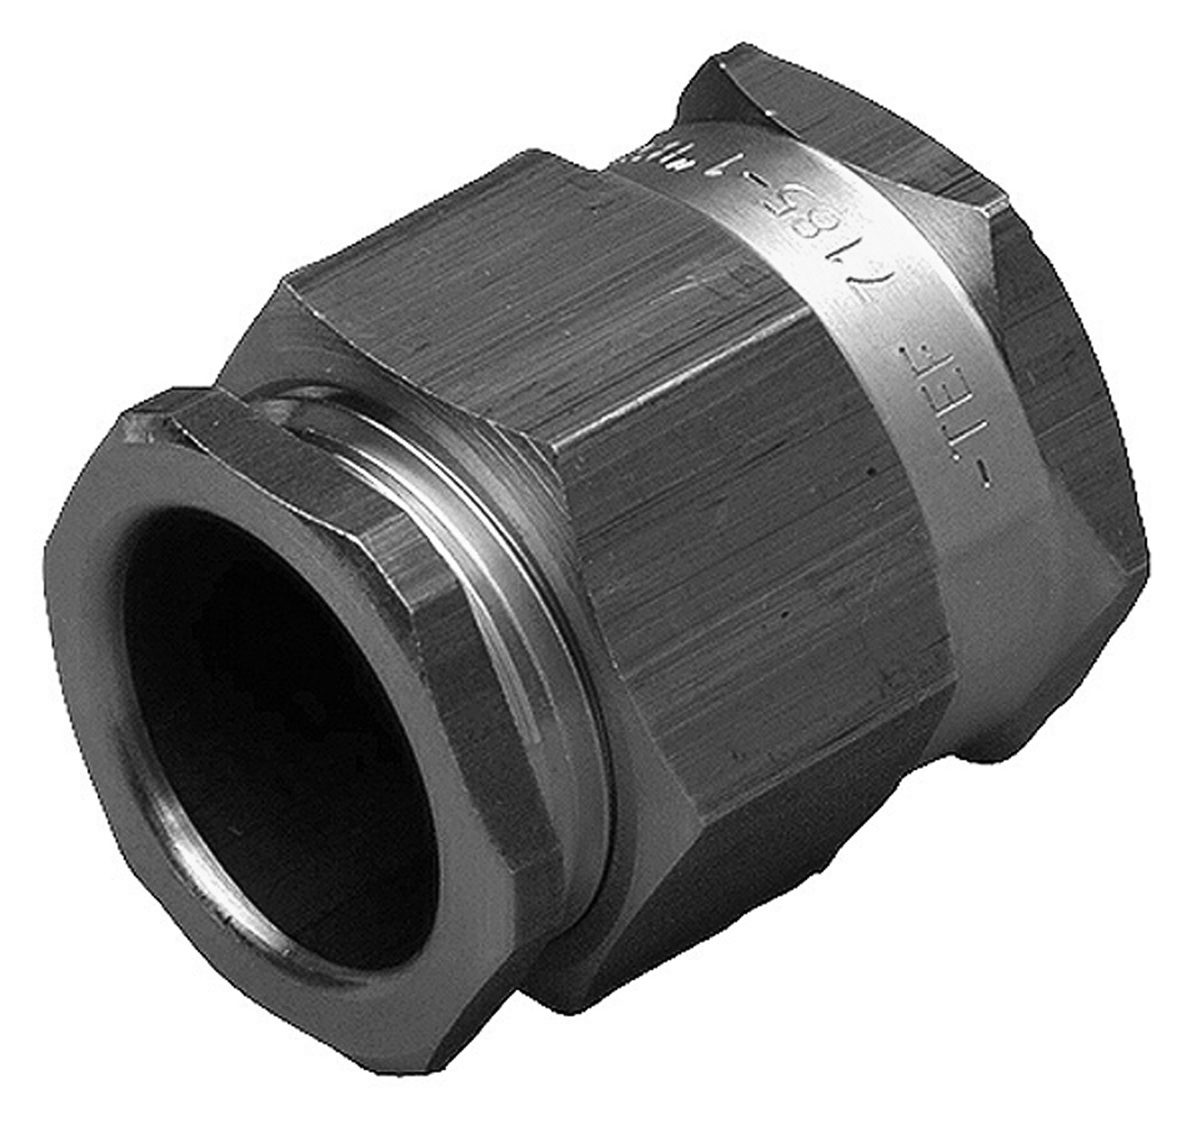 TEF 7182 Pipe Ending Gland: 1/2